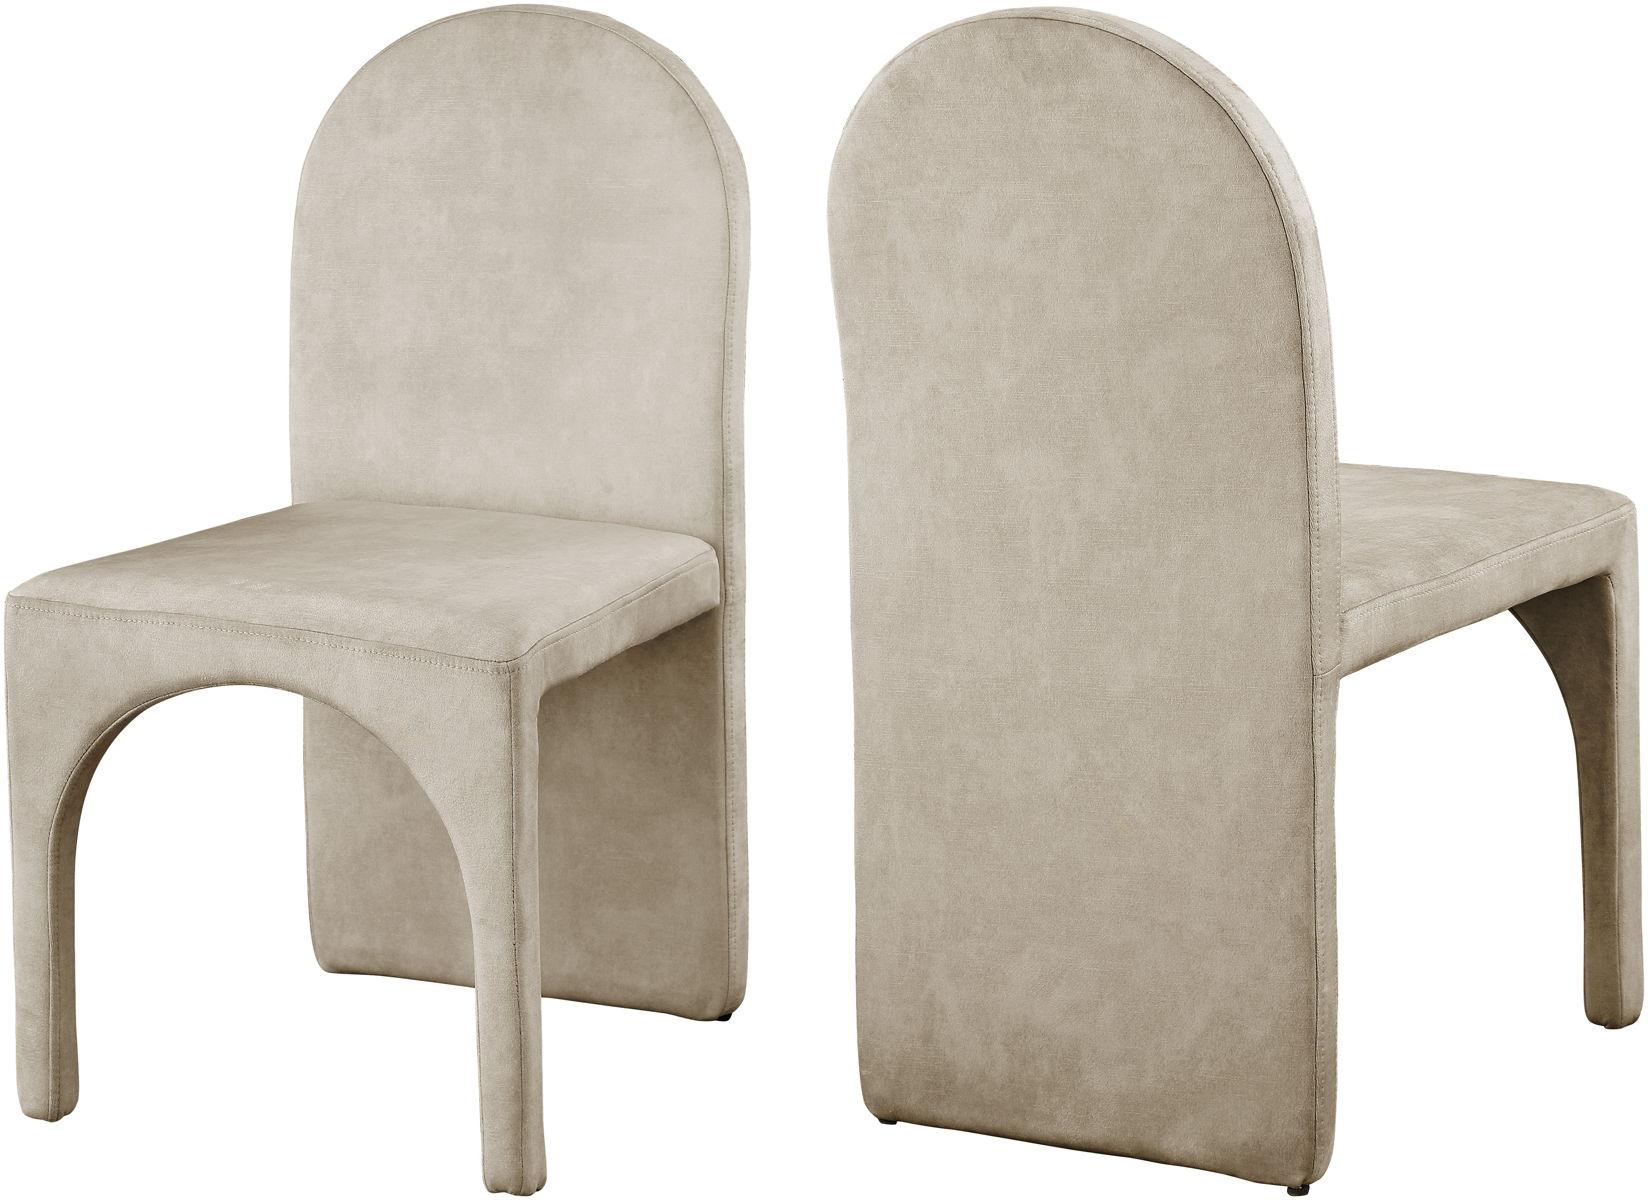 Meridian Furniture - Summer - Dining Side Chair (Set of 2) - Stone - 5th Avenue Furniture